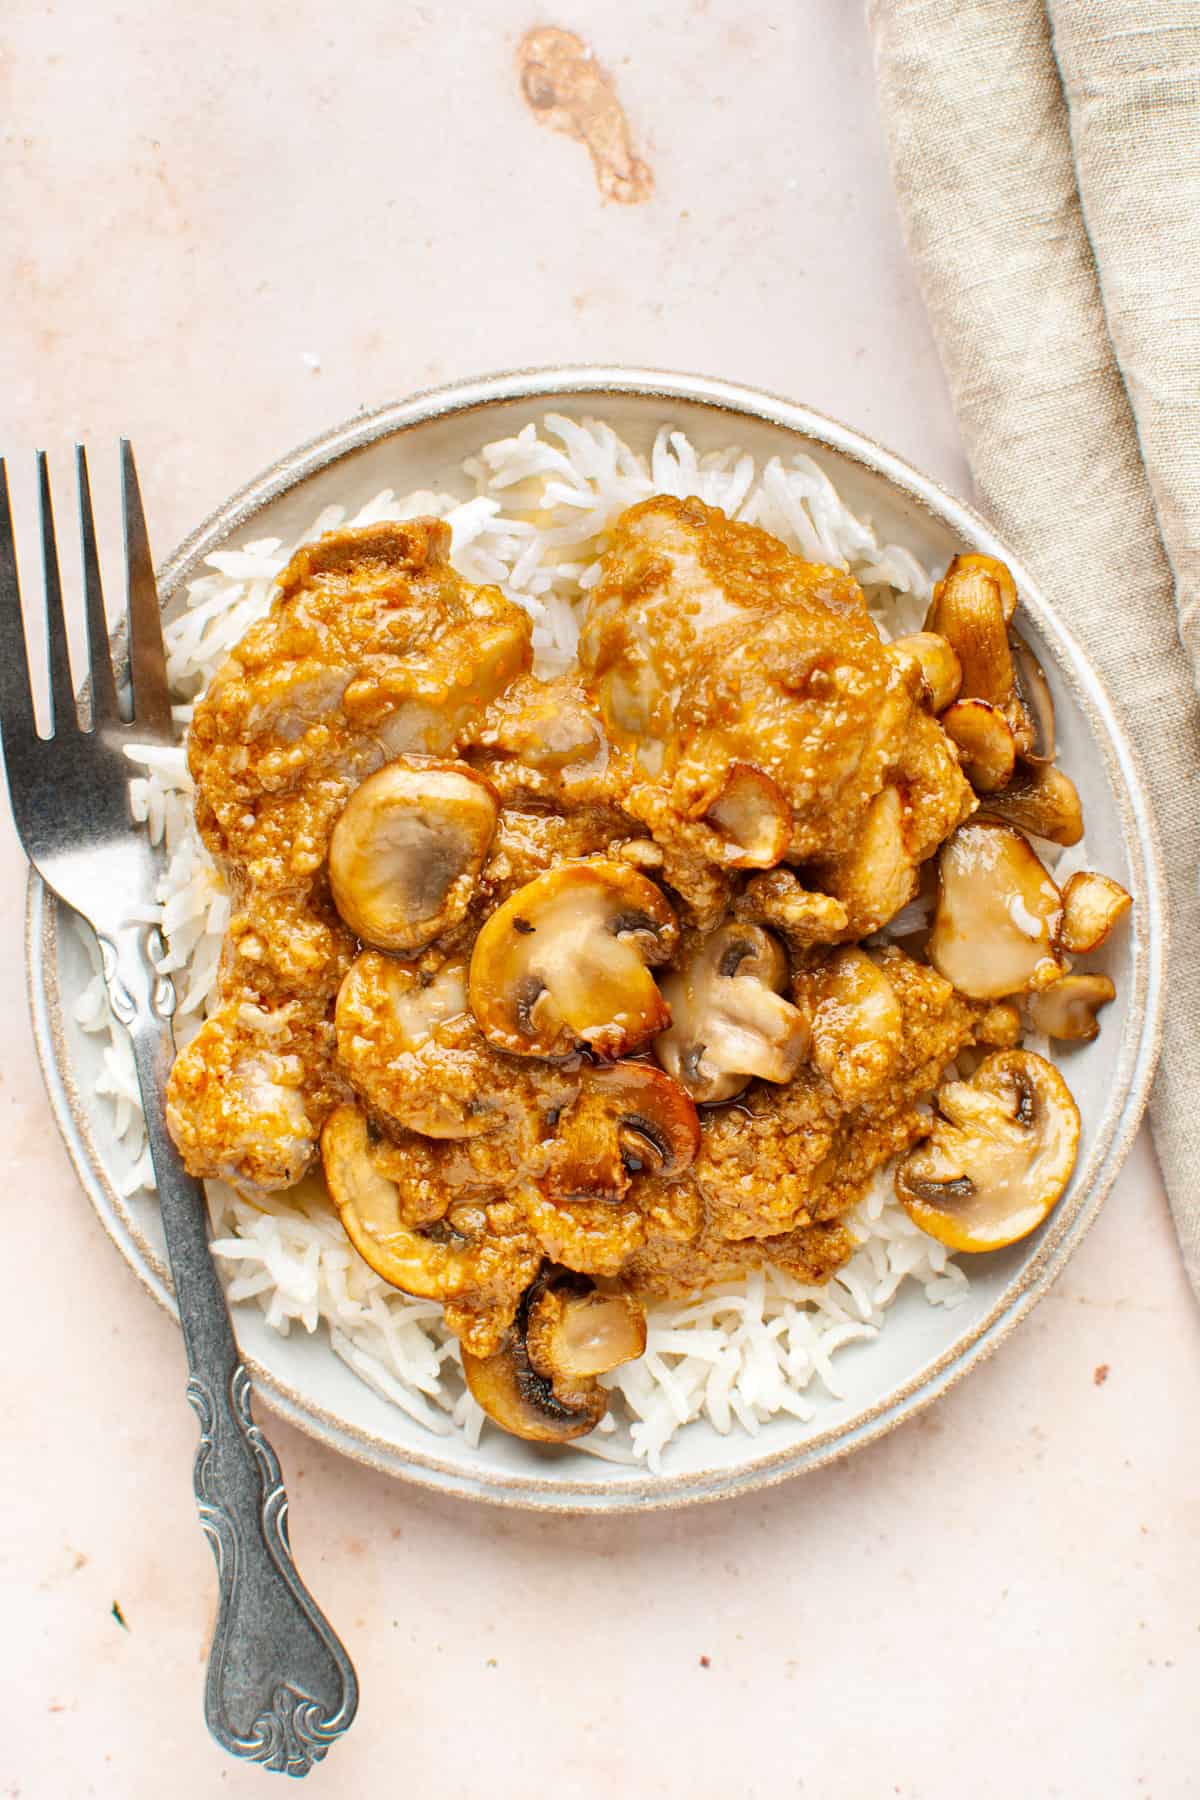 Chicken mushroom curry over rice in a plate with a fork.